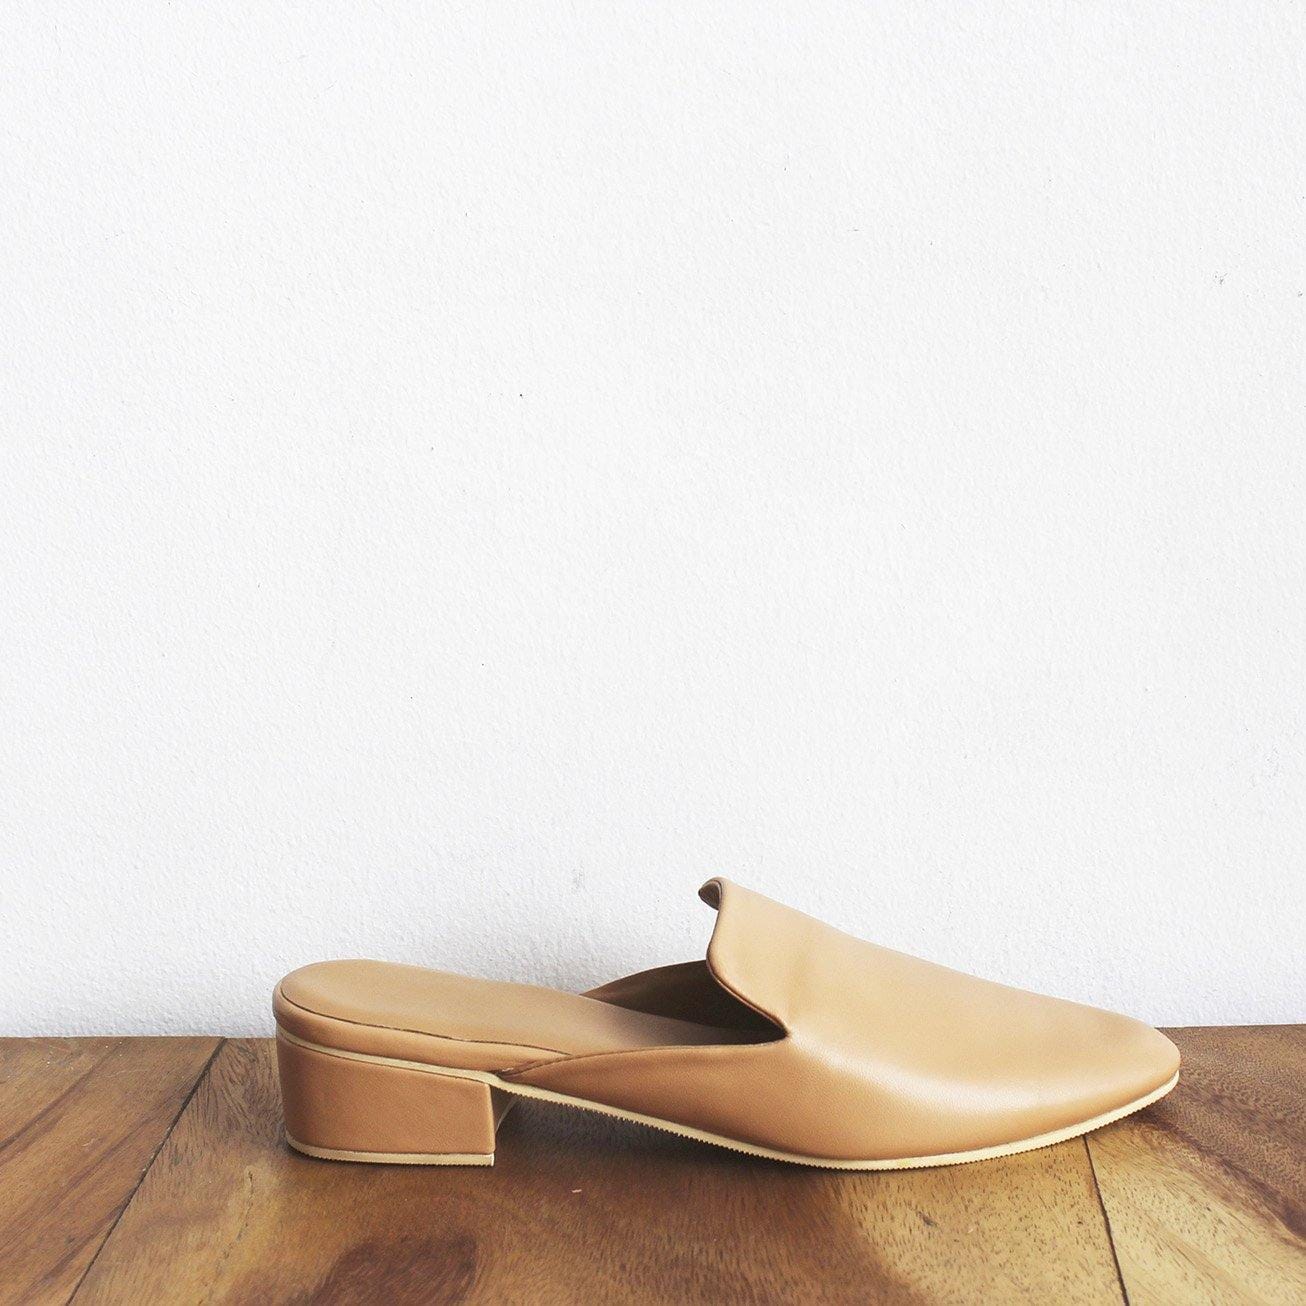 Loafer Mules - 4,5,9,10,11,12